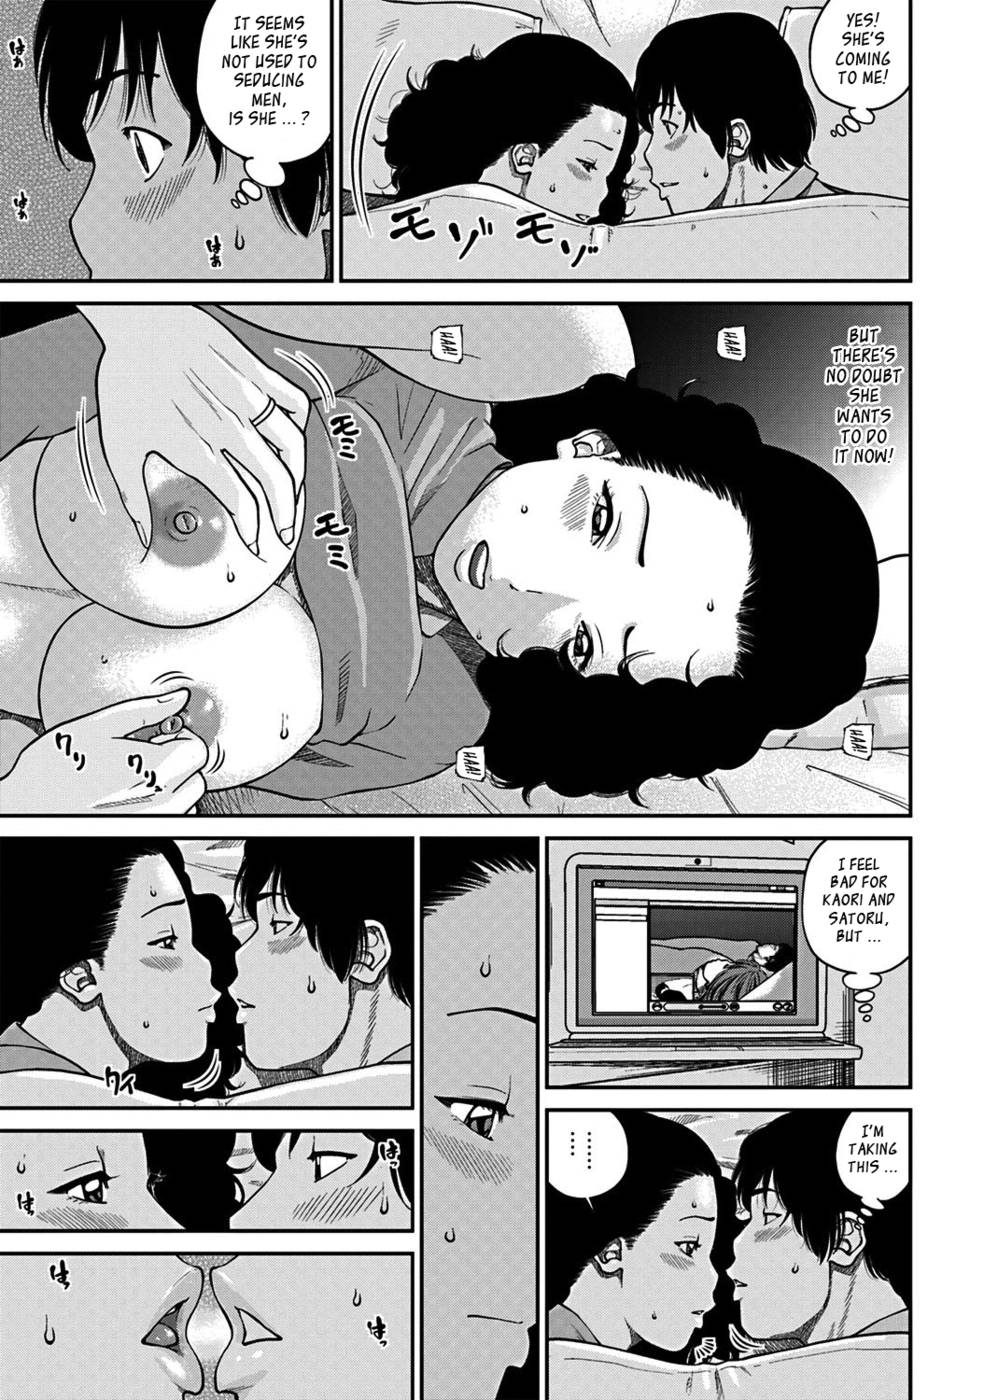 33 Year Old Unsatisfied Wife-Chapter 2-Spouse Swapping-First Night-Hentai Manga Hentai Comic